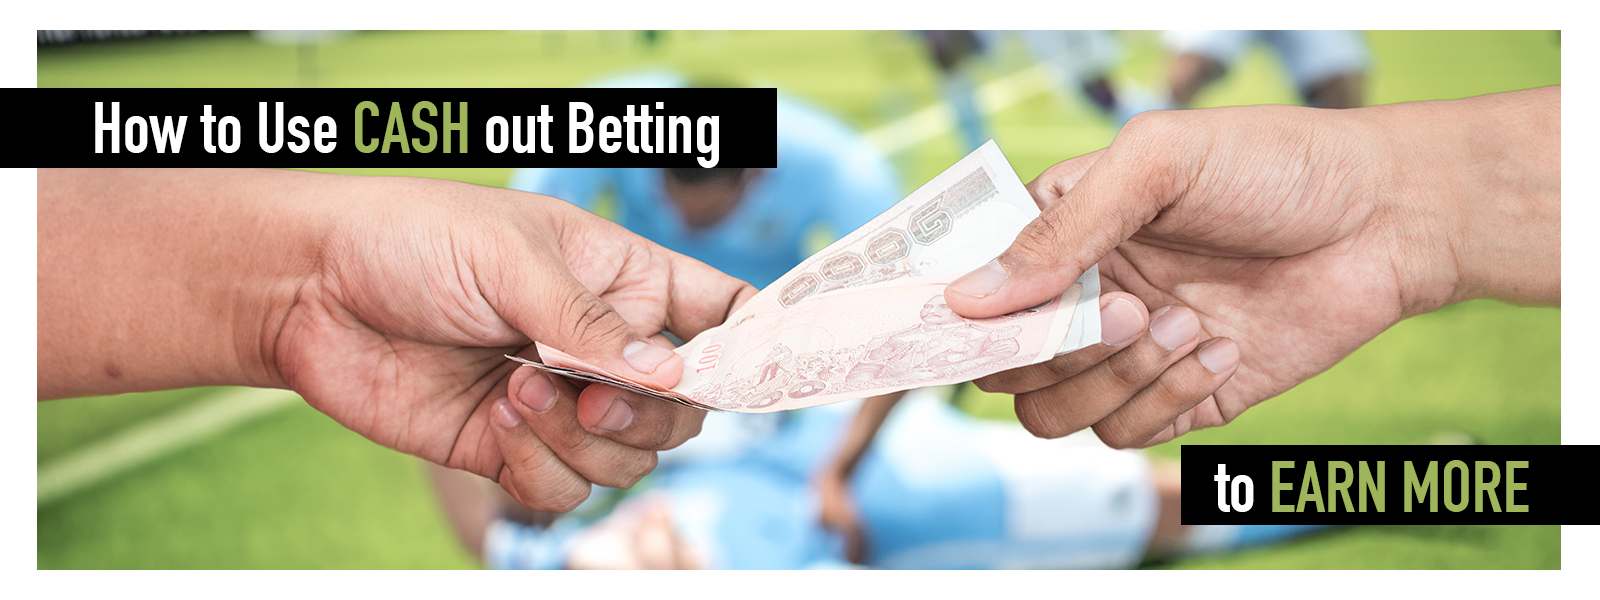 How to Use Cash Out Betting to Earn More